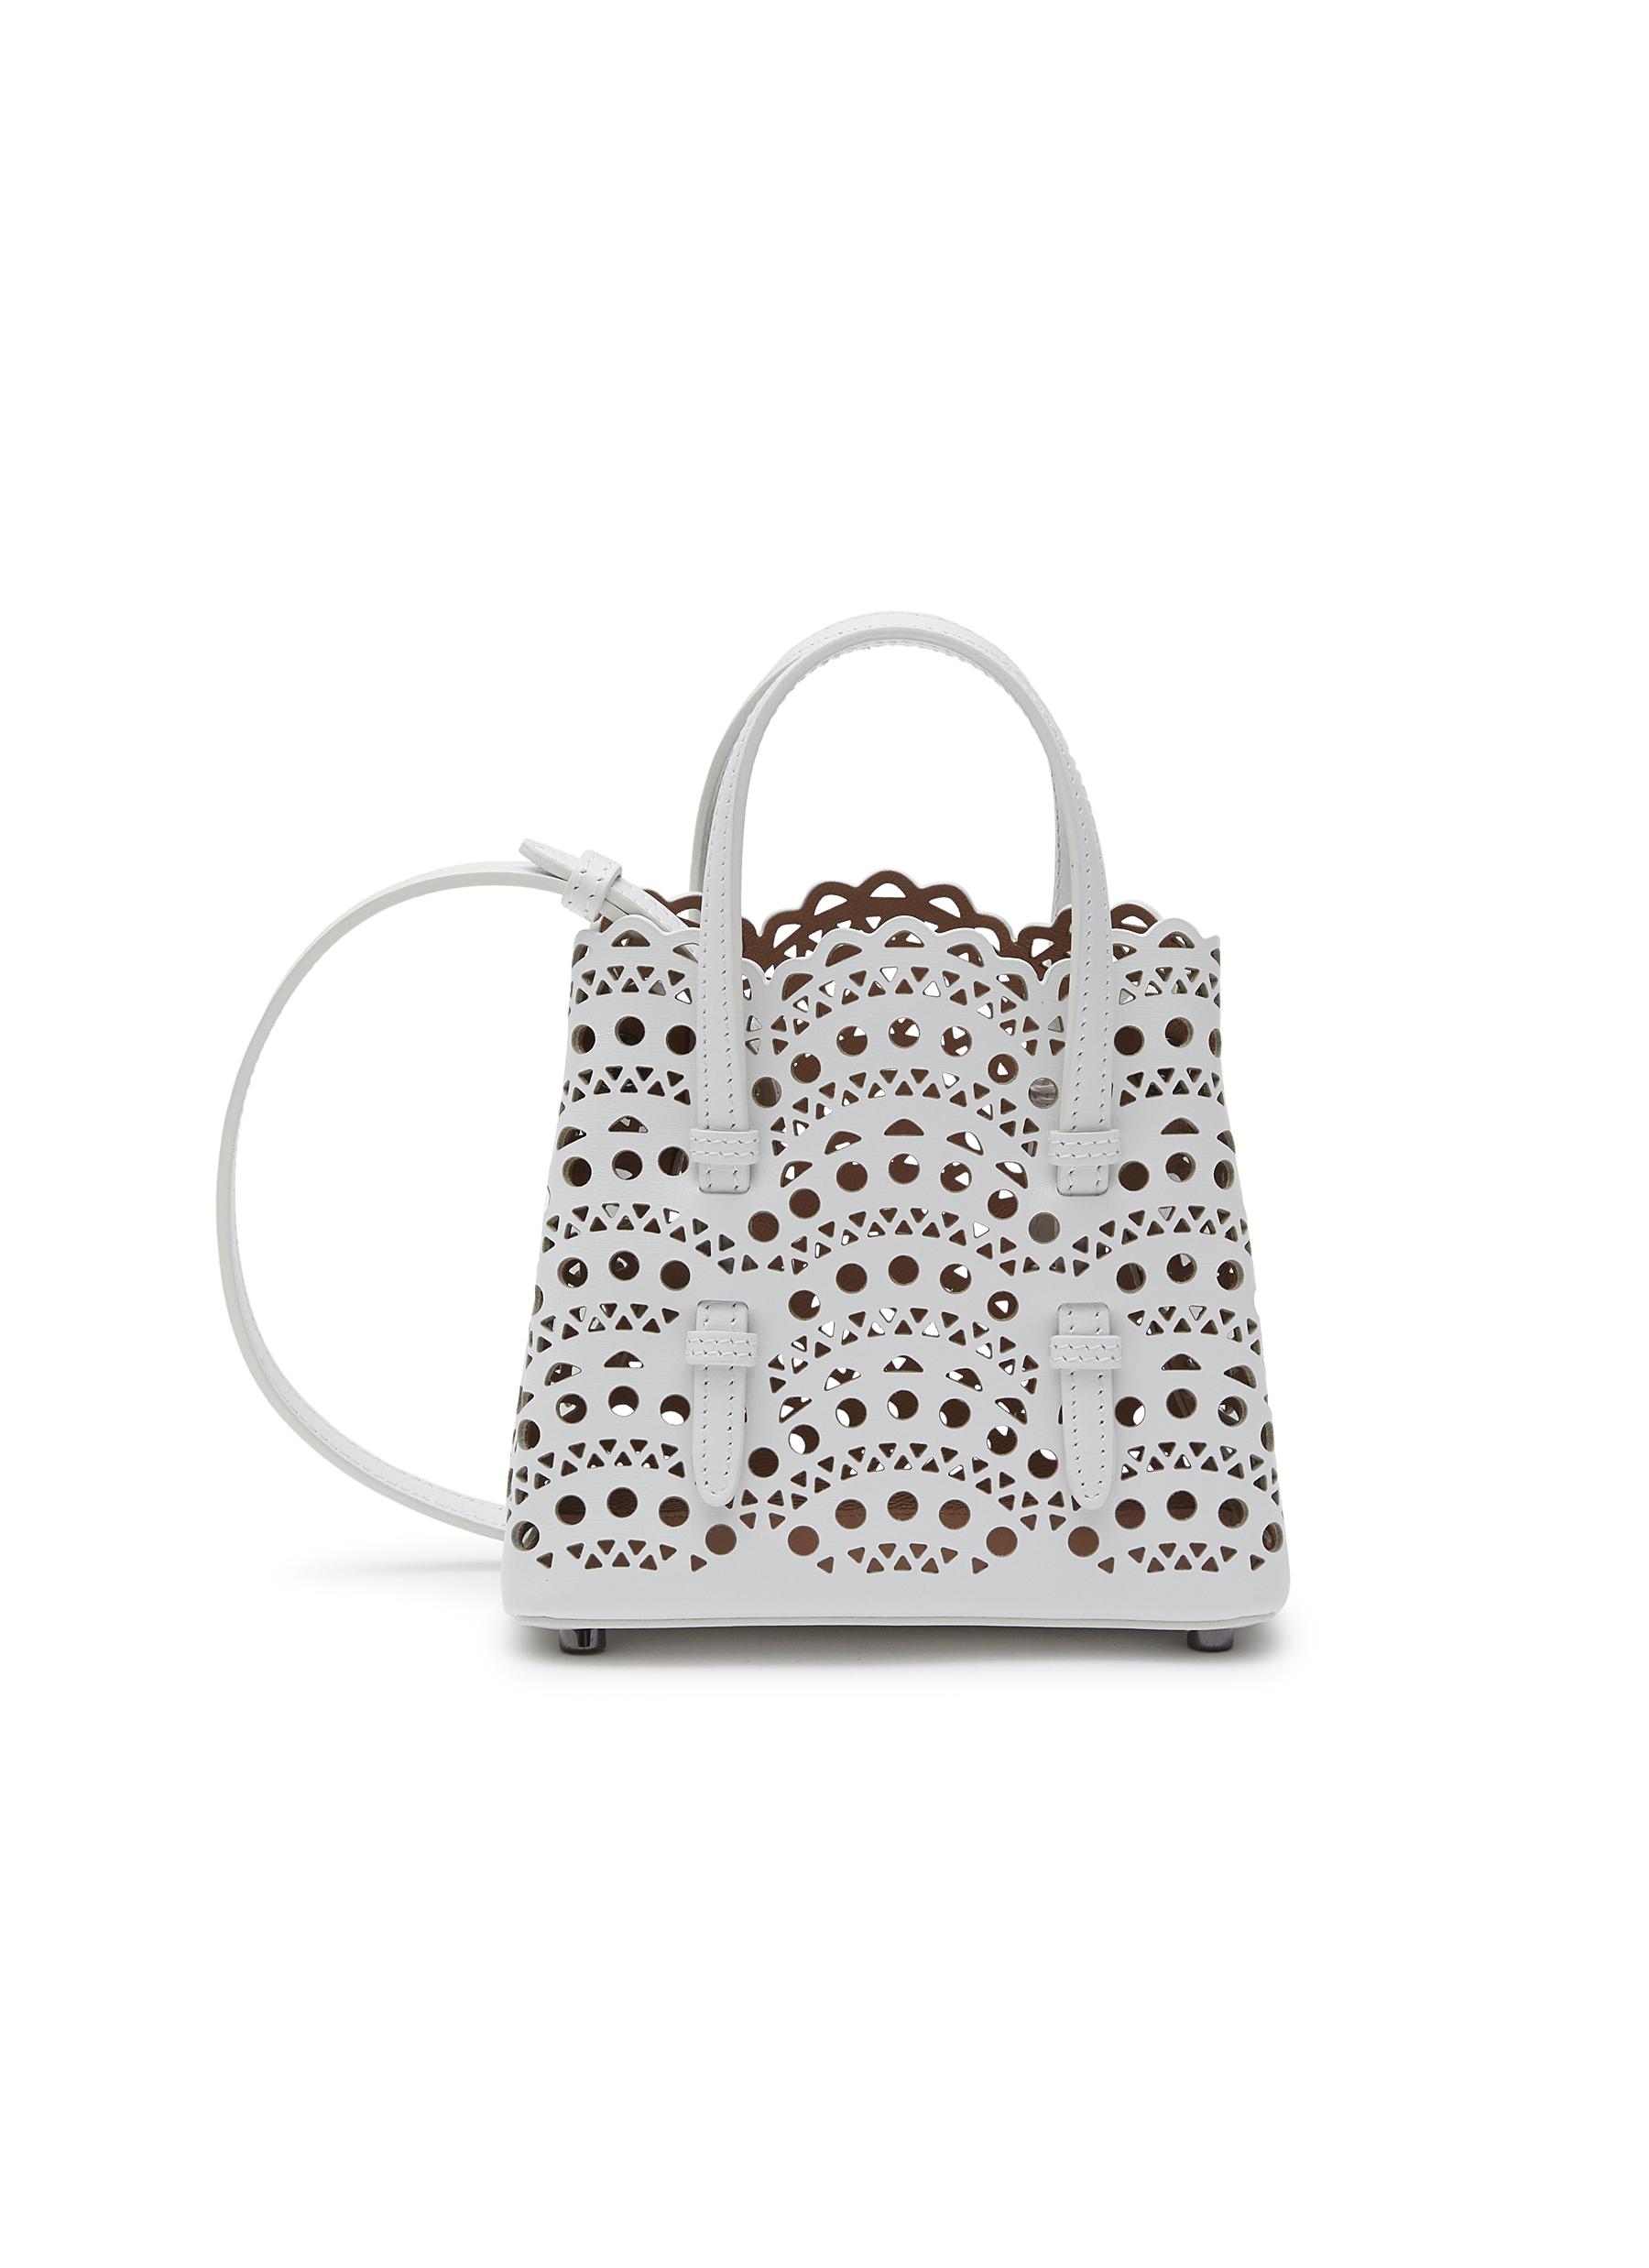 'MINA' 16 VIENNE PERFORATED CALFSKIN LEATHER TOTE BAG